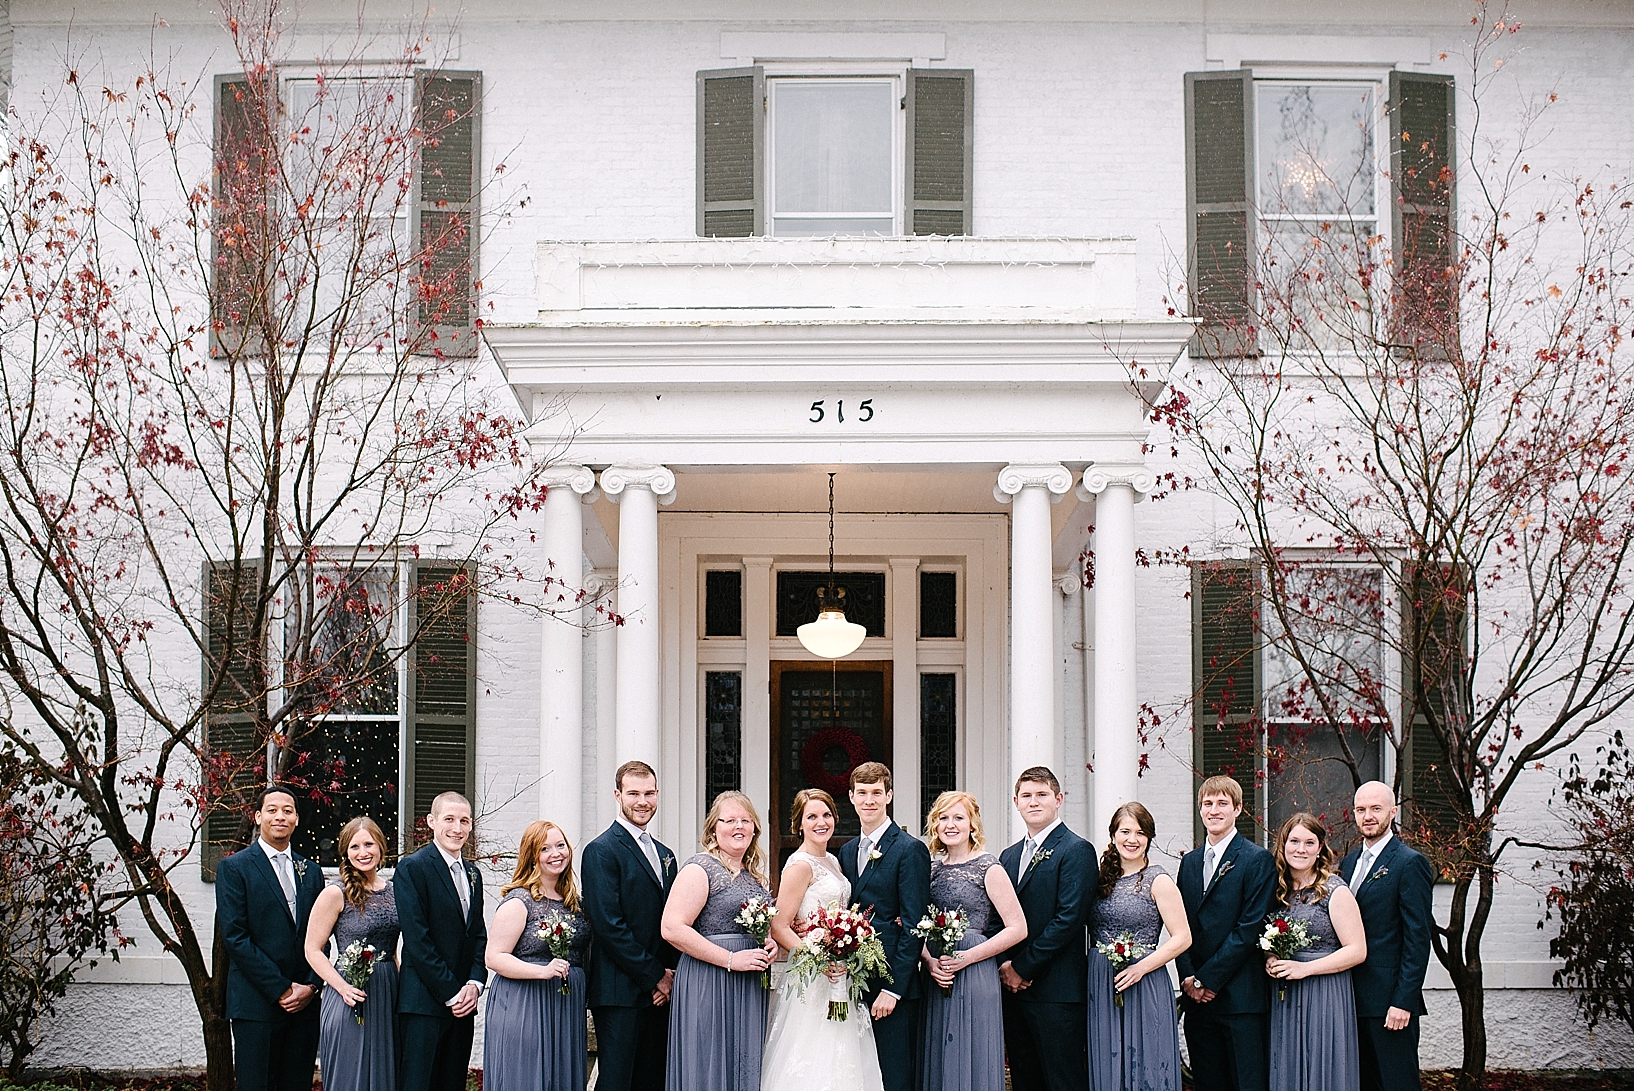 bridal party in navy and grey standing in front of white home with pillars